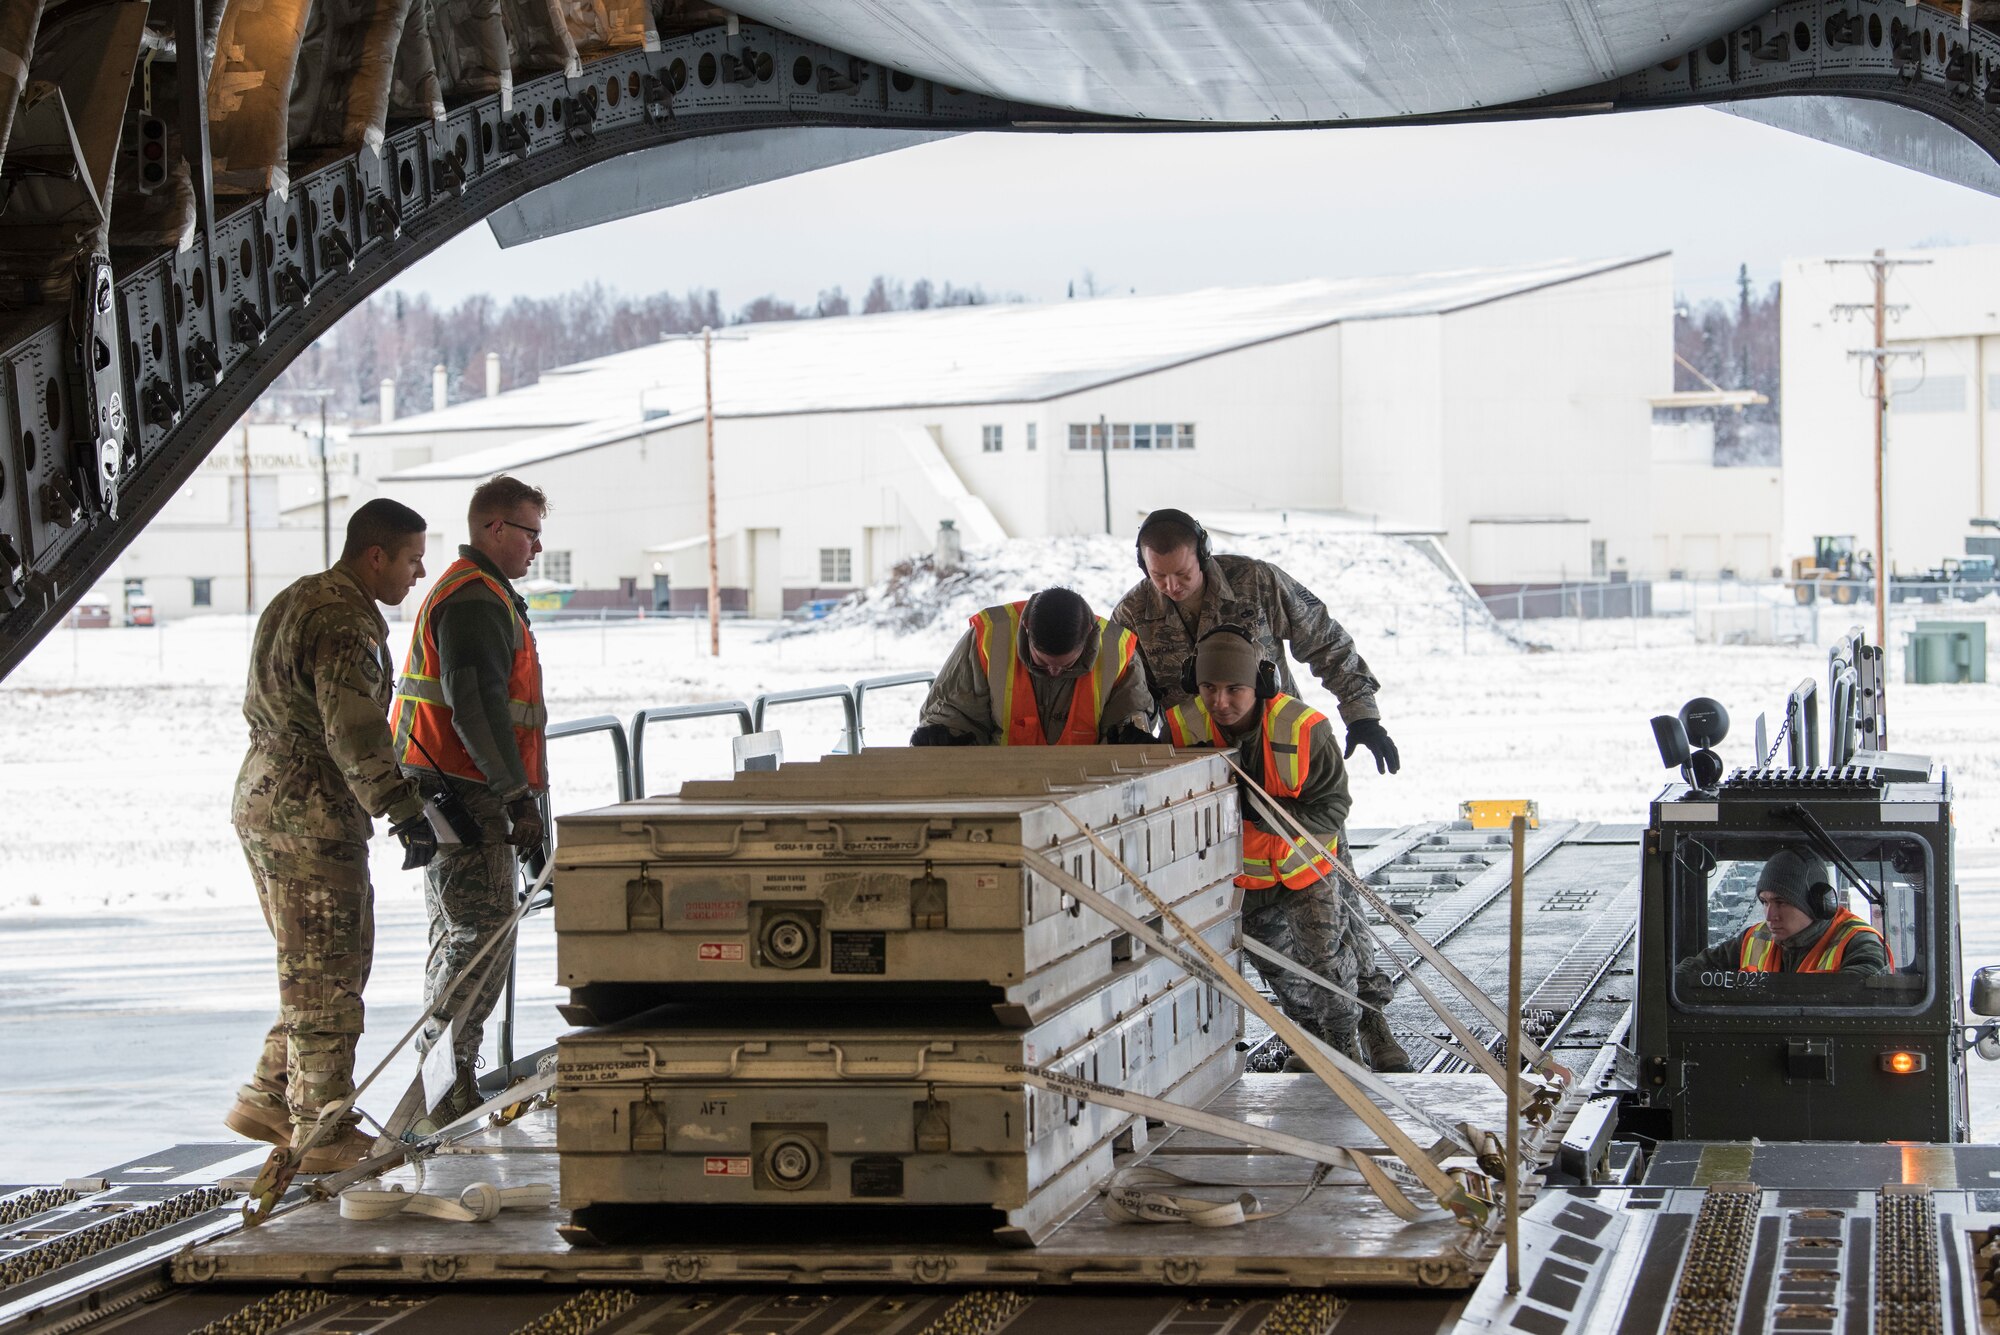 U.S. Air Force Airmen with the 732nd Aircraft Mobility Squadron unload cargo onto a C-17 Globemaster III at Joint Base Elmendorf-Richardson, Alaska, Dec. 1, 2018. JBER mission operations continue following a 7.0 earthquake hit to Anchorage, Alaska, on Nov. 30.